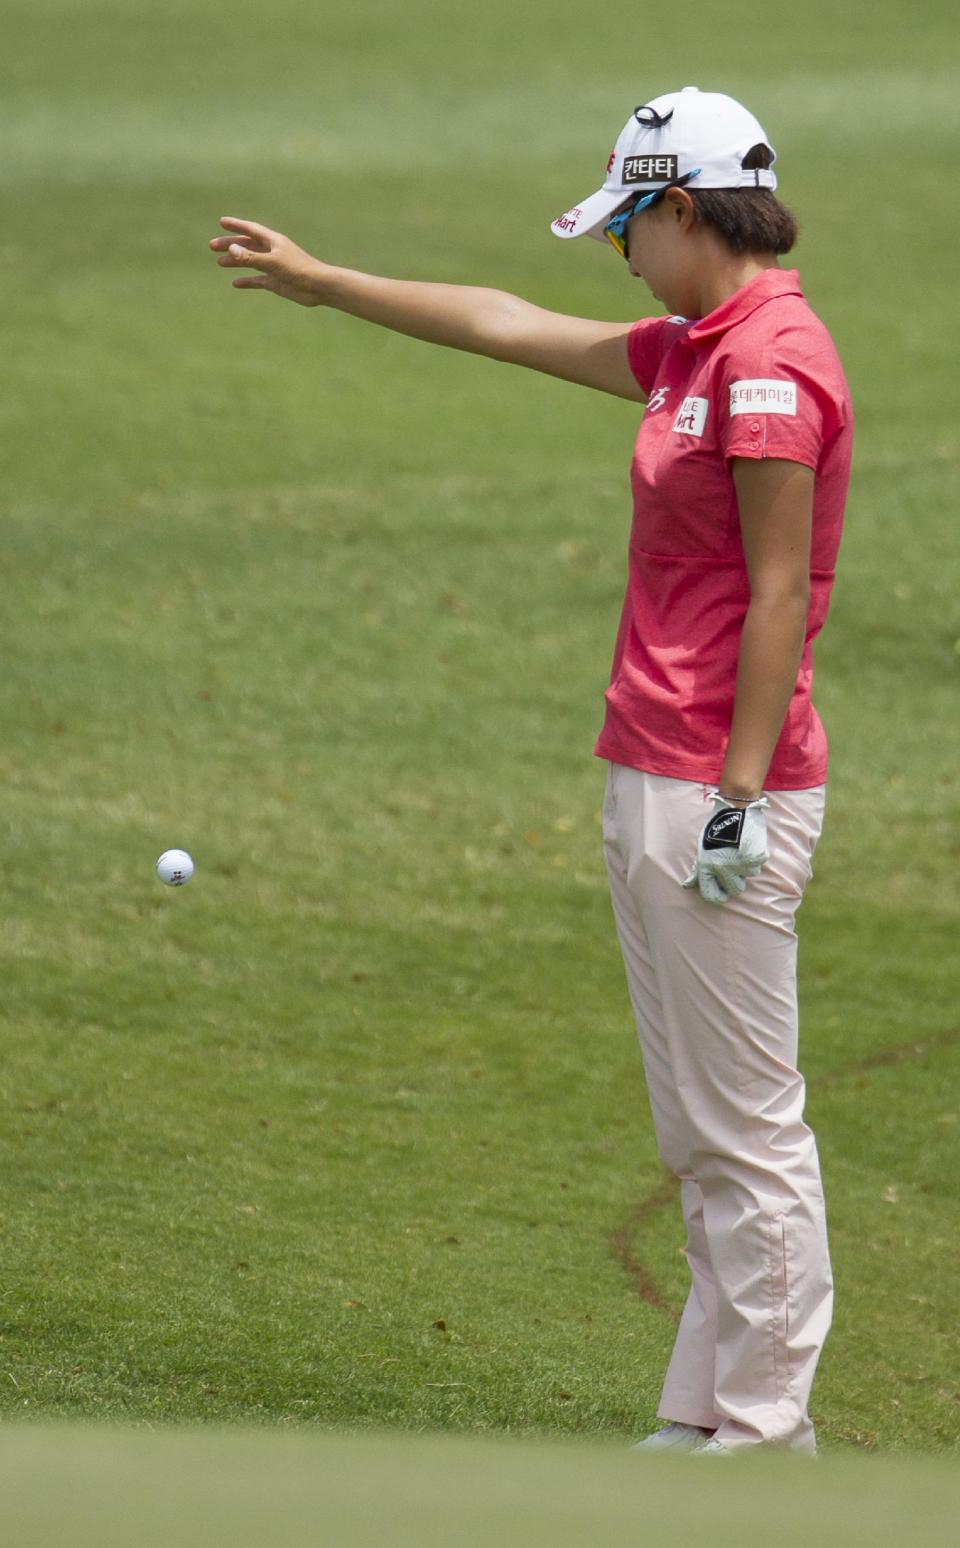 Hyo Joo Kim, of South Korea, drops her golf ball after her original shot ended up in a water hazard on her approach to the fifth green in the final round of the LPGA LOTTE Championship golf tournament at Ko Olina Golf Club, Saturday, April 19, 2014, in Kapolei, Hawaii. (AP Photo/Eugene Tanner)